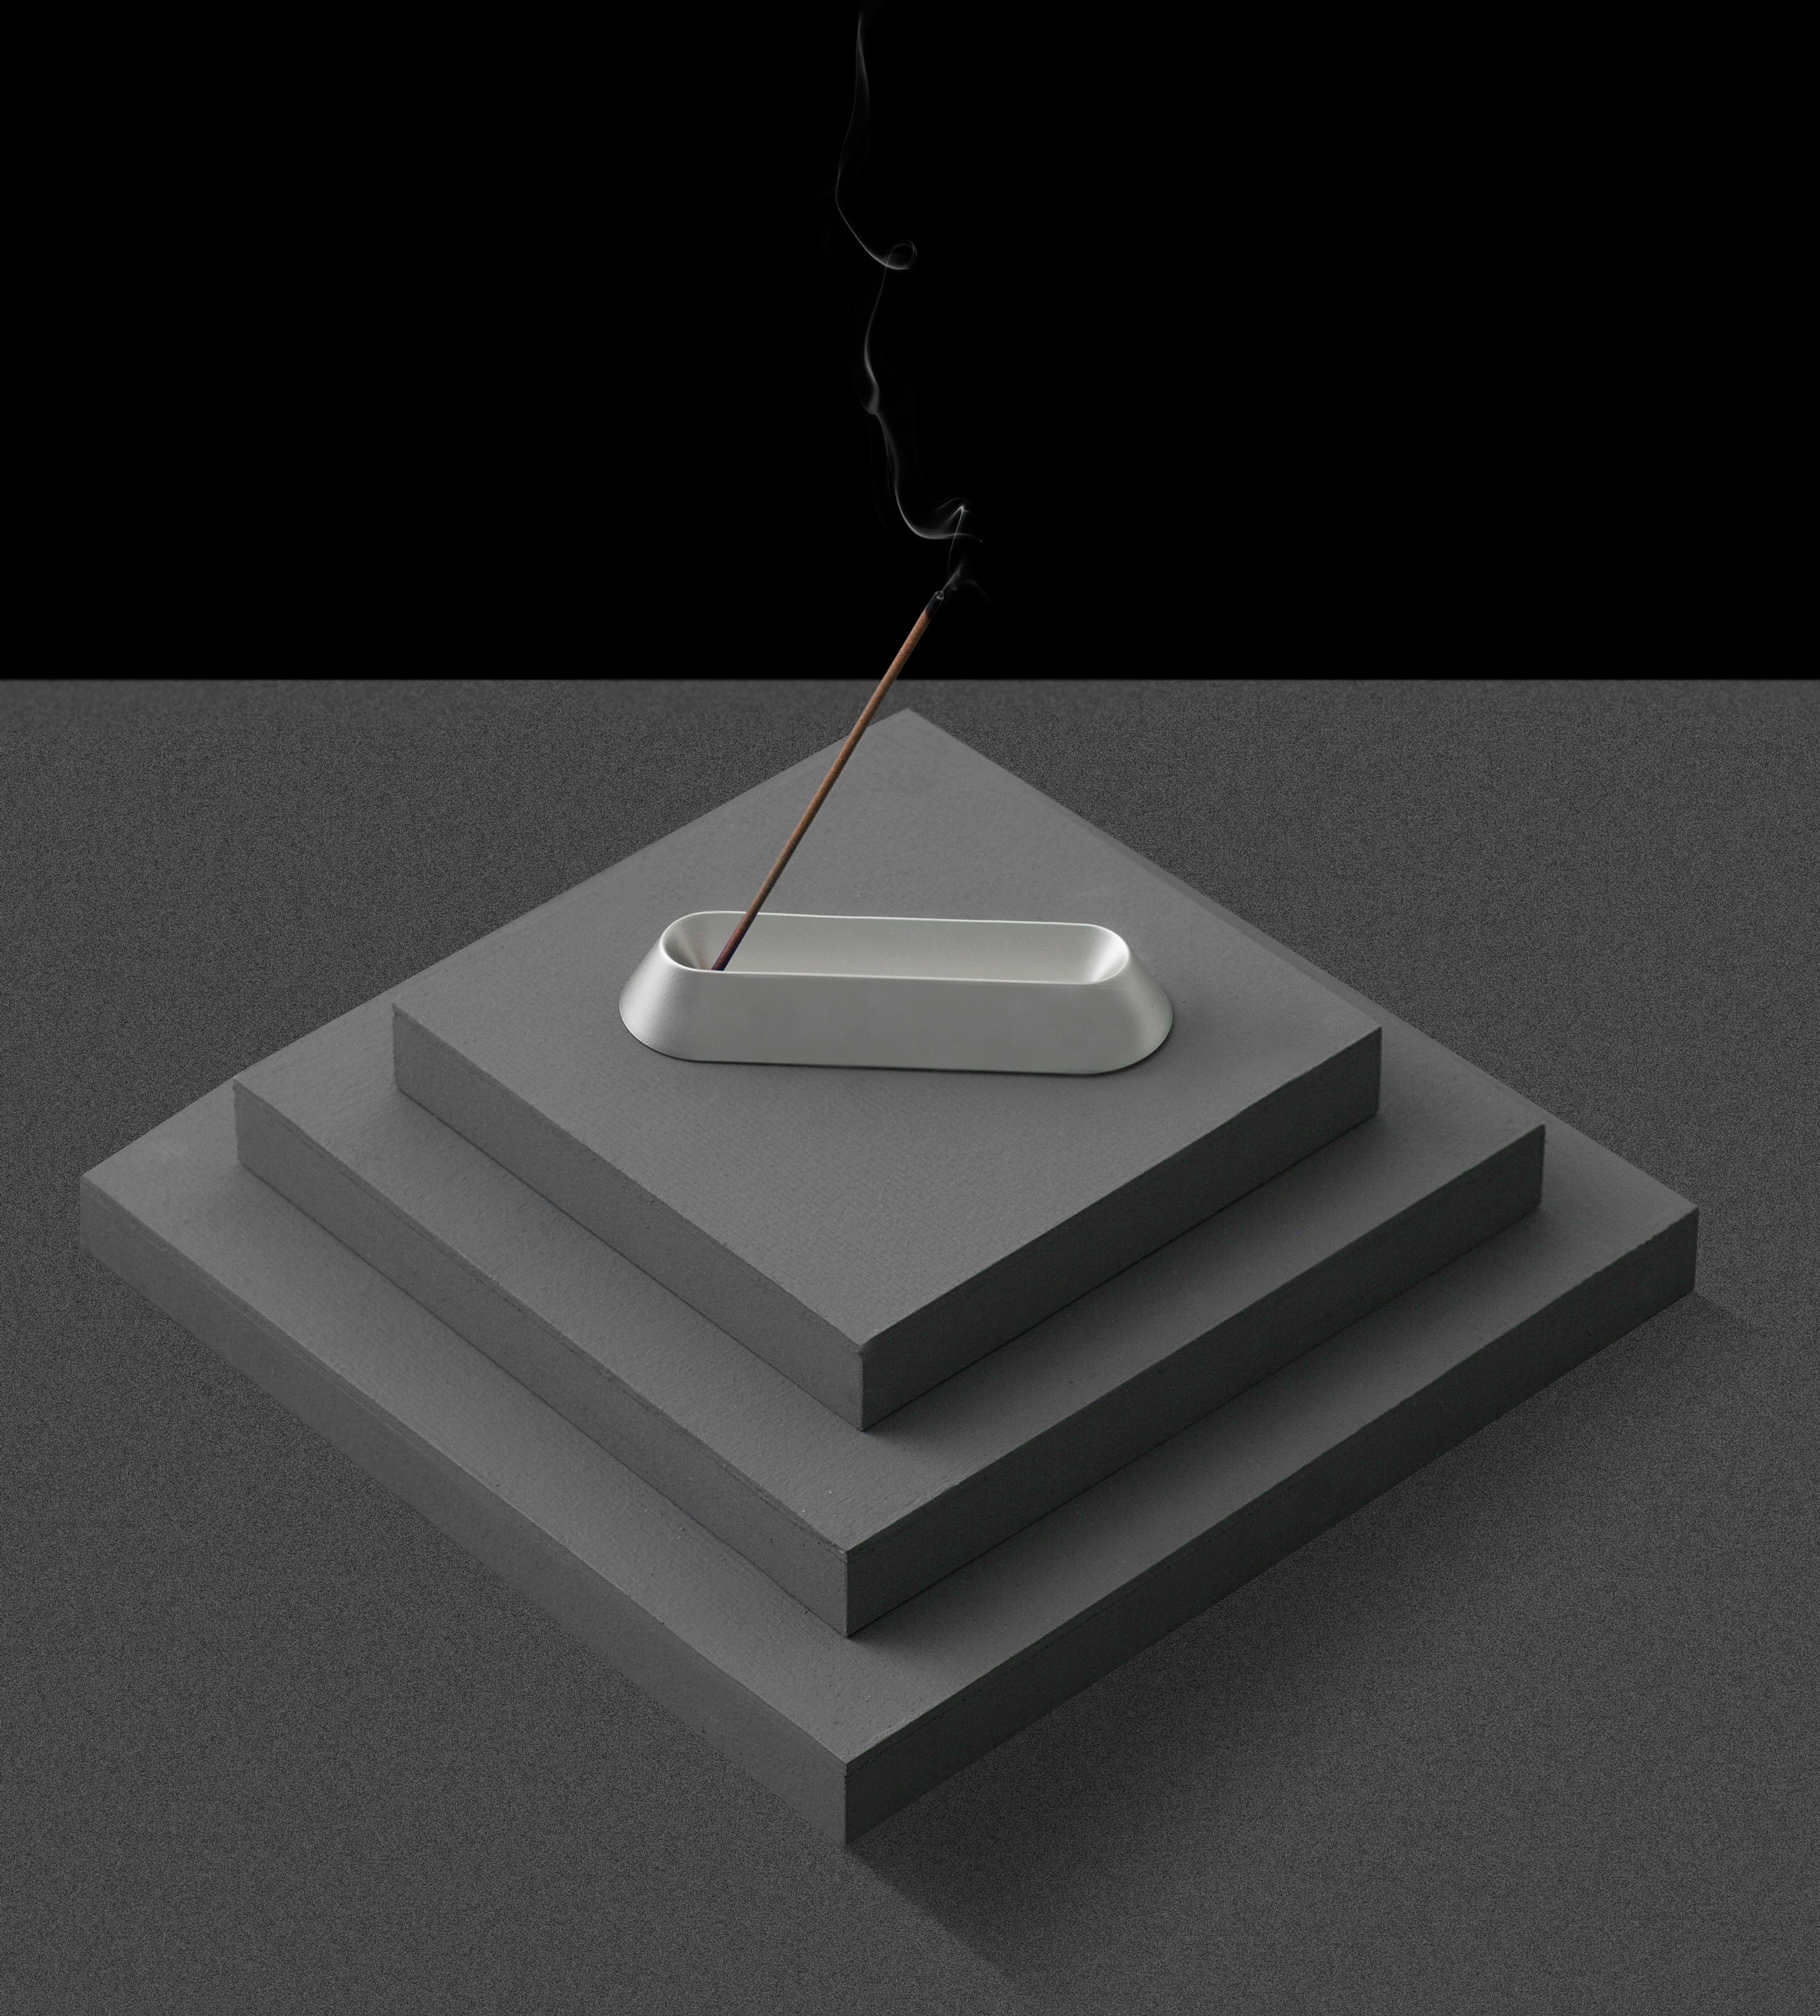 Gully Incense Holder by Phil Procter for Good Thing